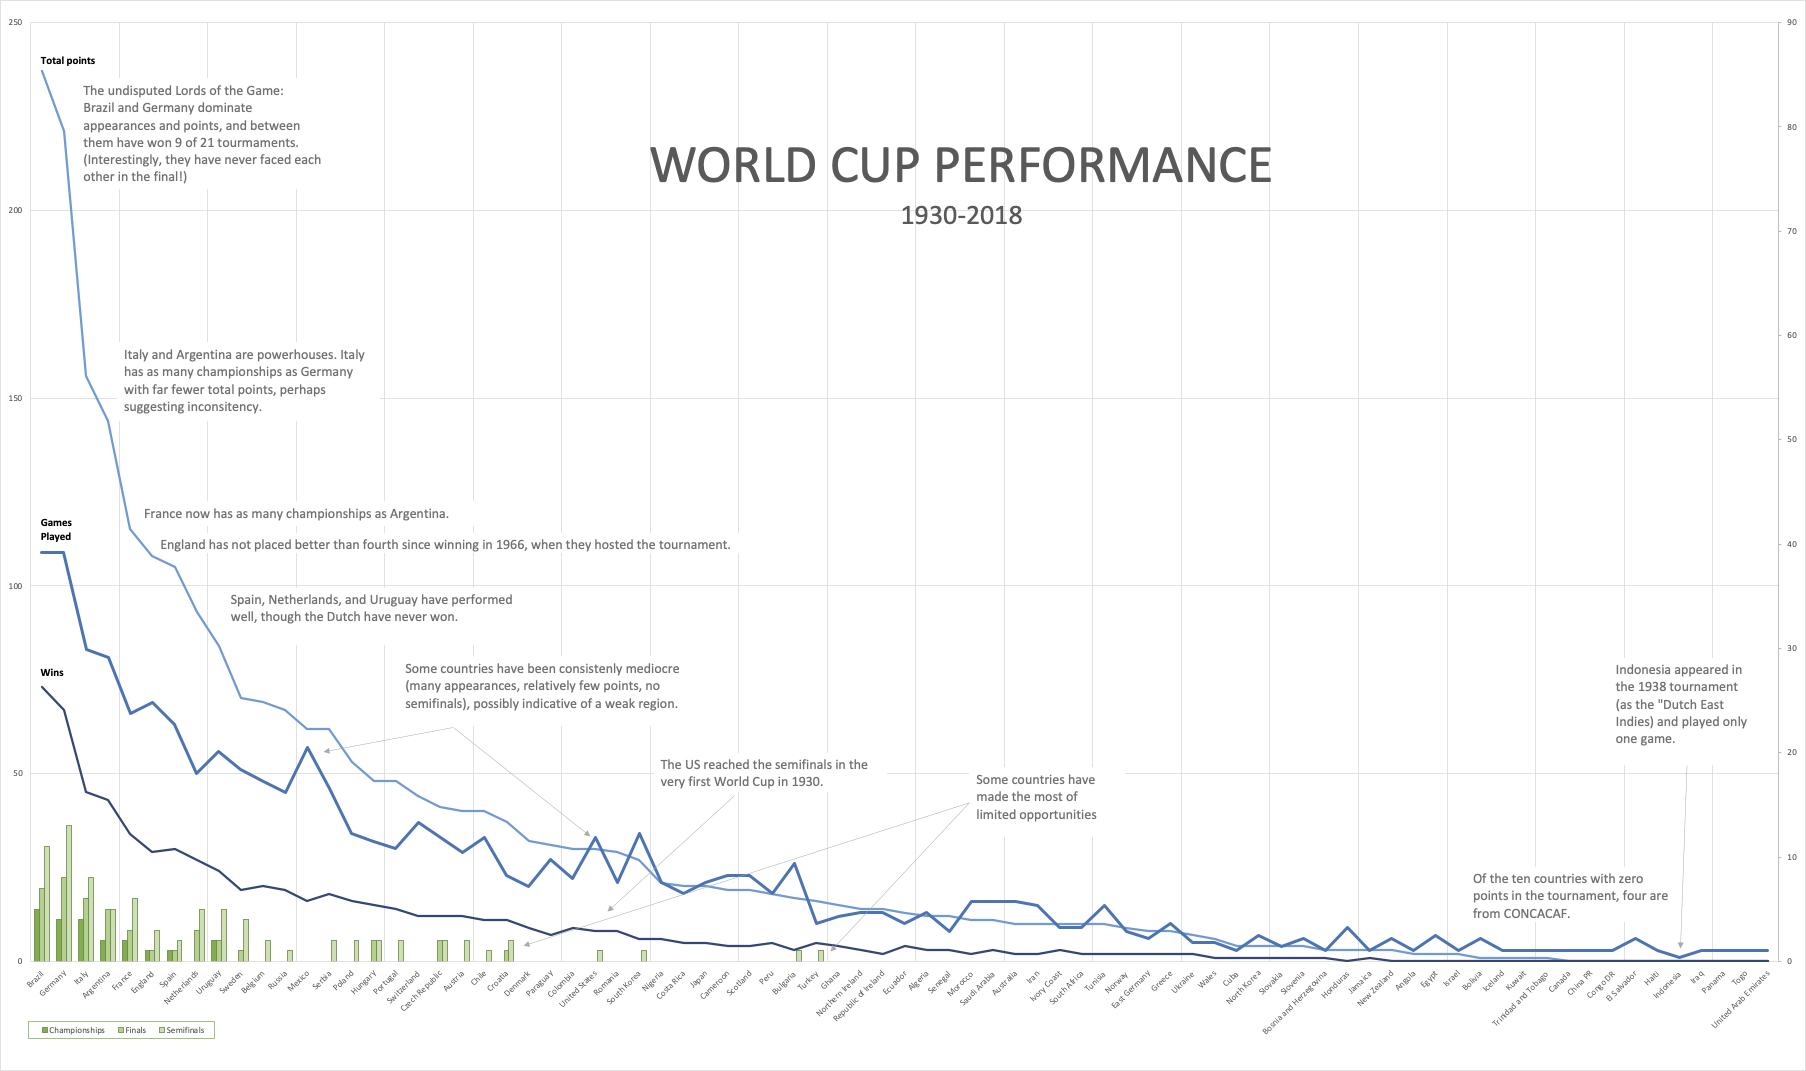 Graph of world cup soccer performance, following a power-law curve from 230 points and 5 championships by Brazil, down to zero points for a collection of ten countries, four from the CONCACAF region.